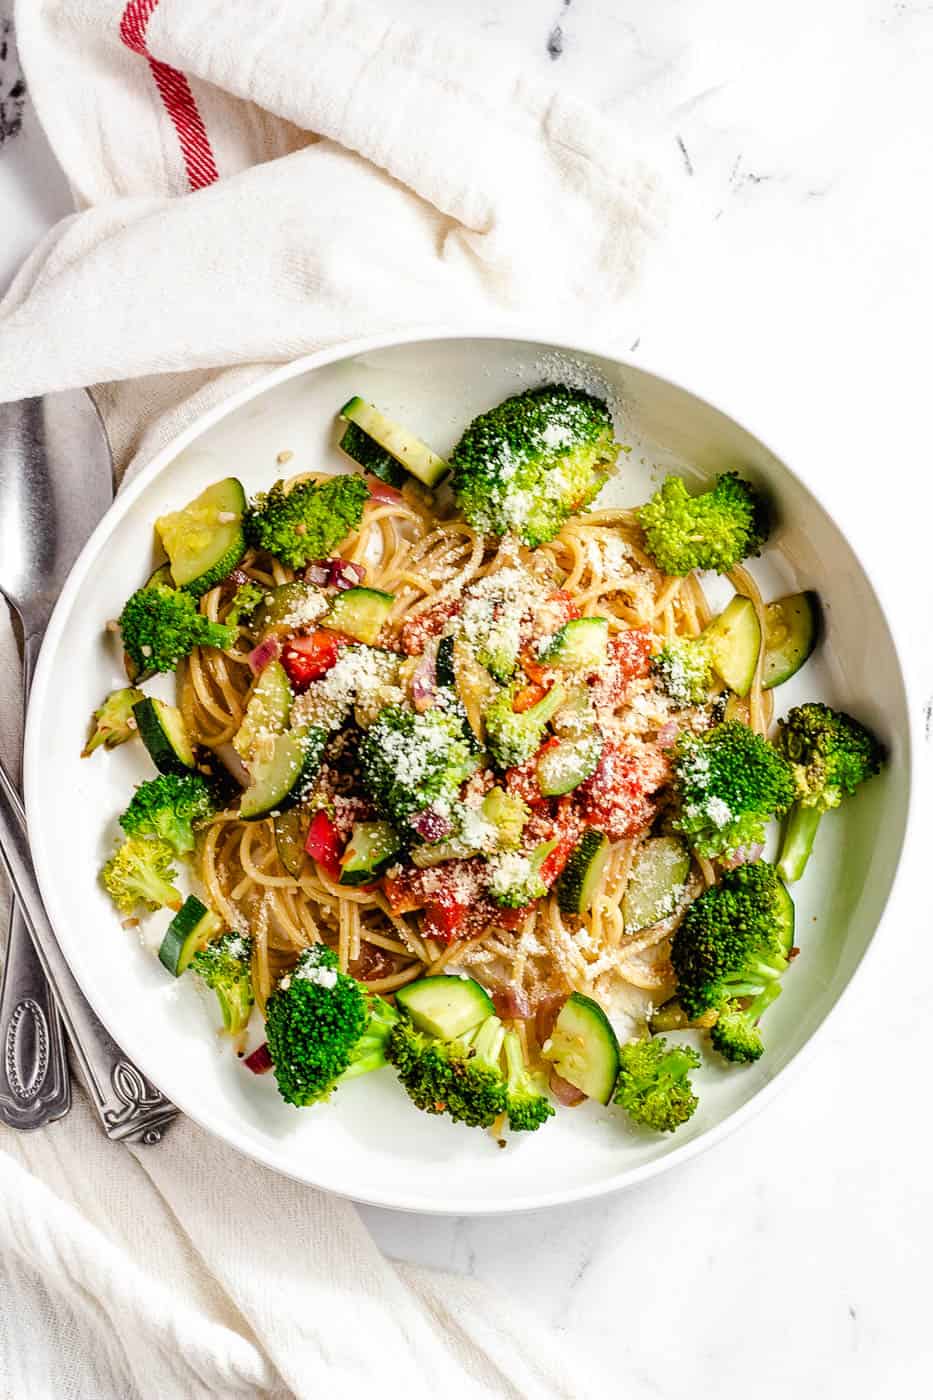 garlic pasta with veggies in a white bowl with parmesan cheese